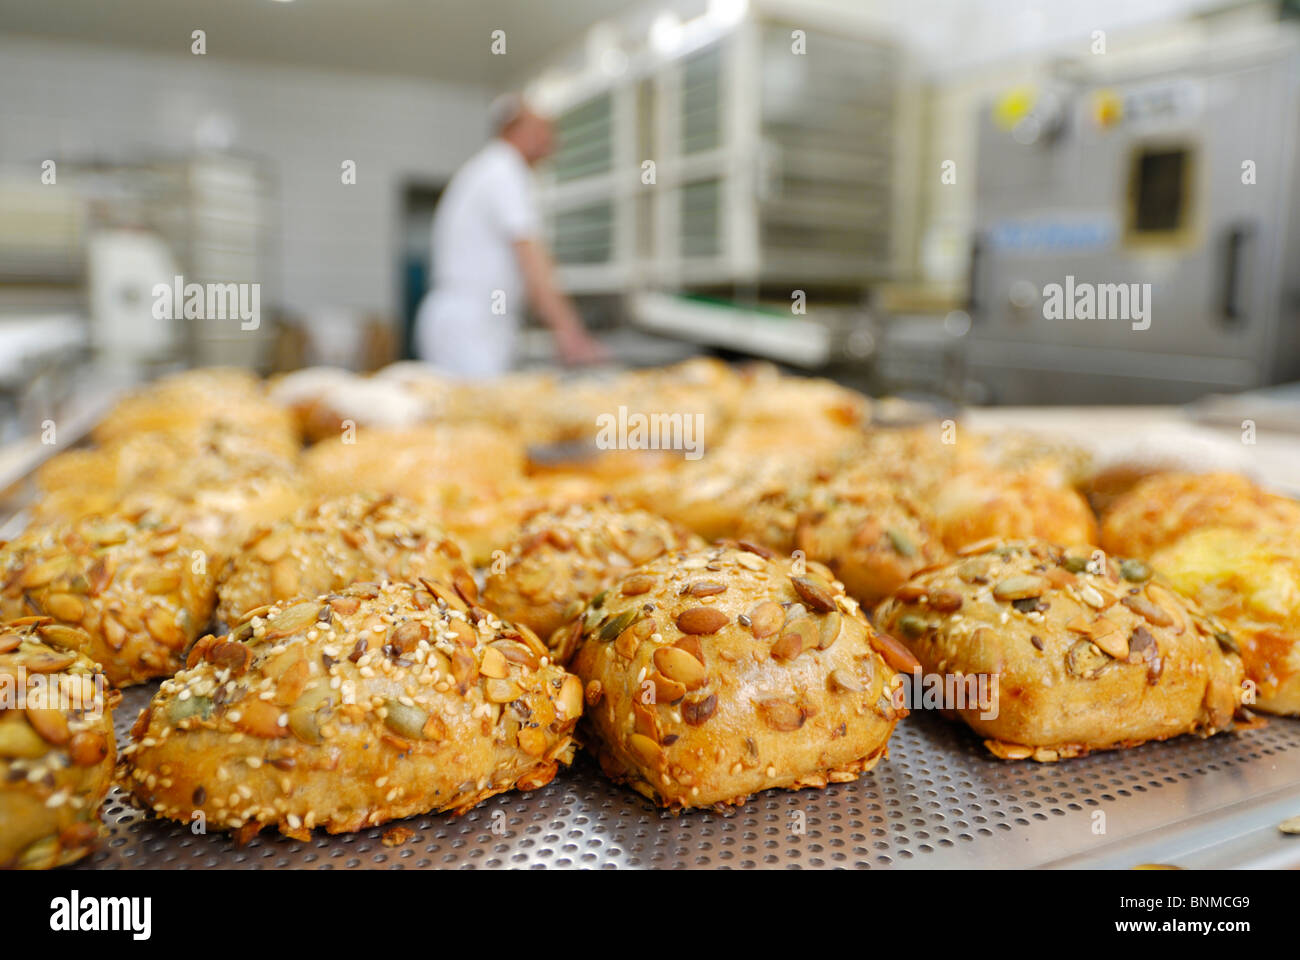 completed bread rolls in front, blurred working baker behind Stock Photo